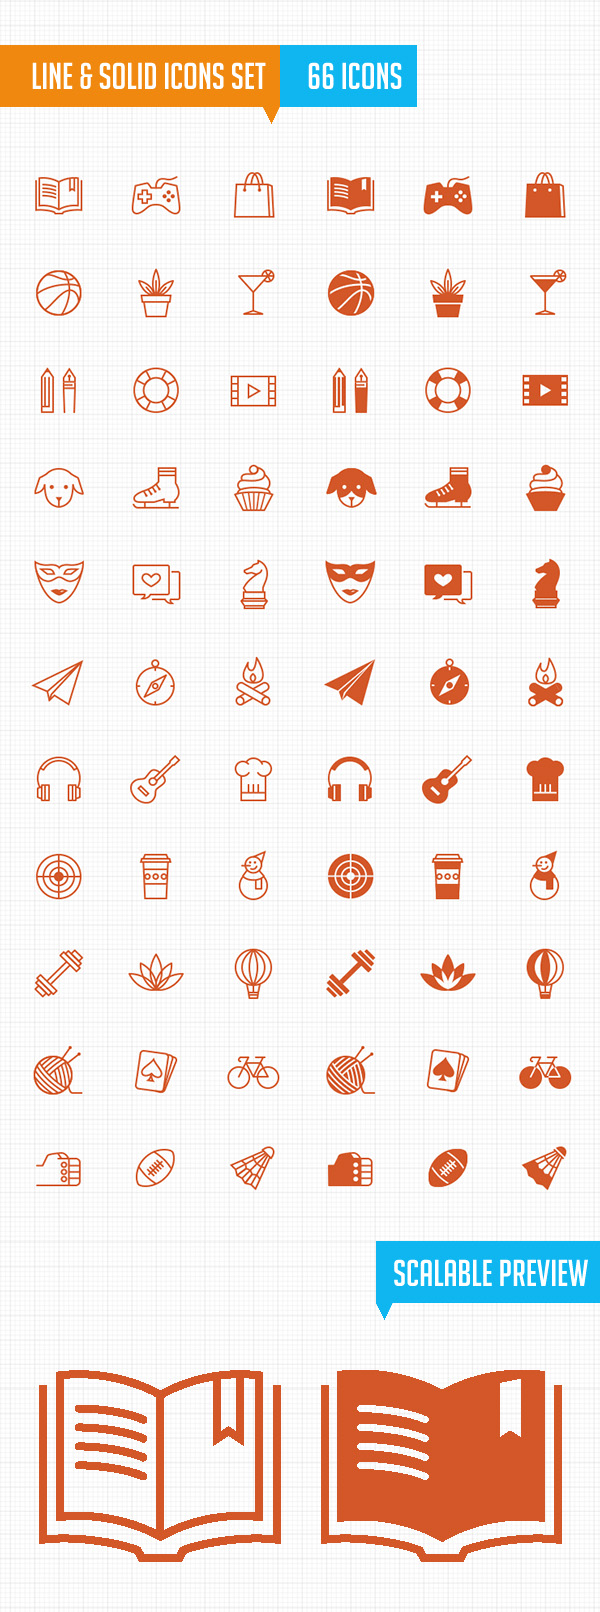 Line & Filled Leisure Activity Icons Set (66 Icons)